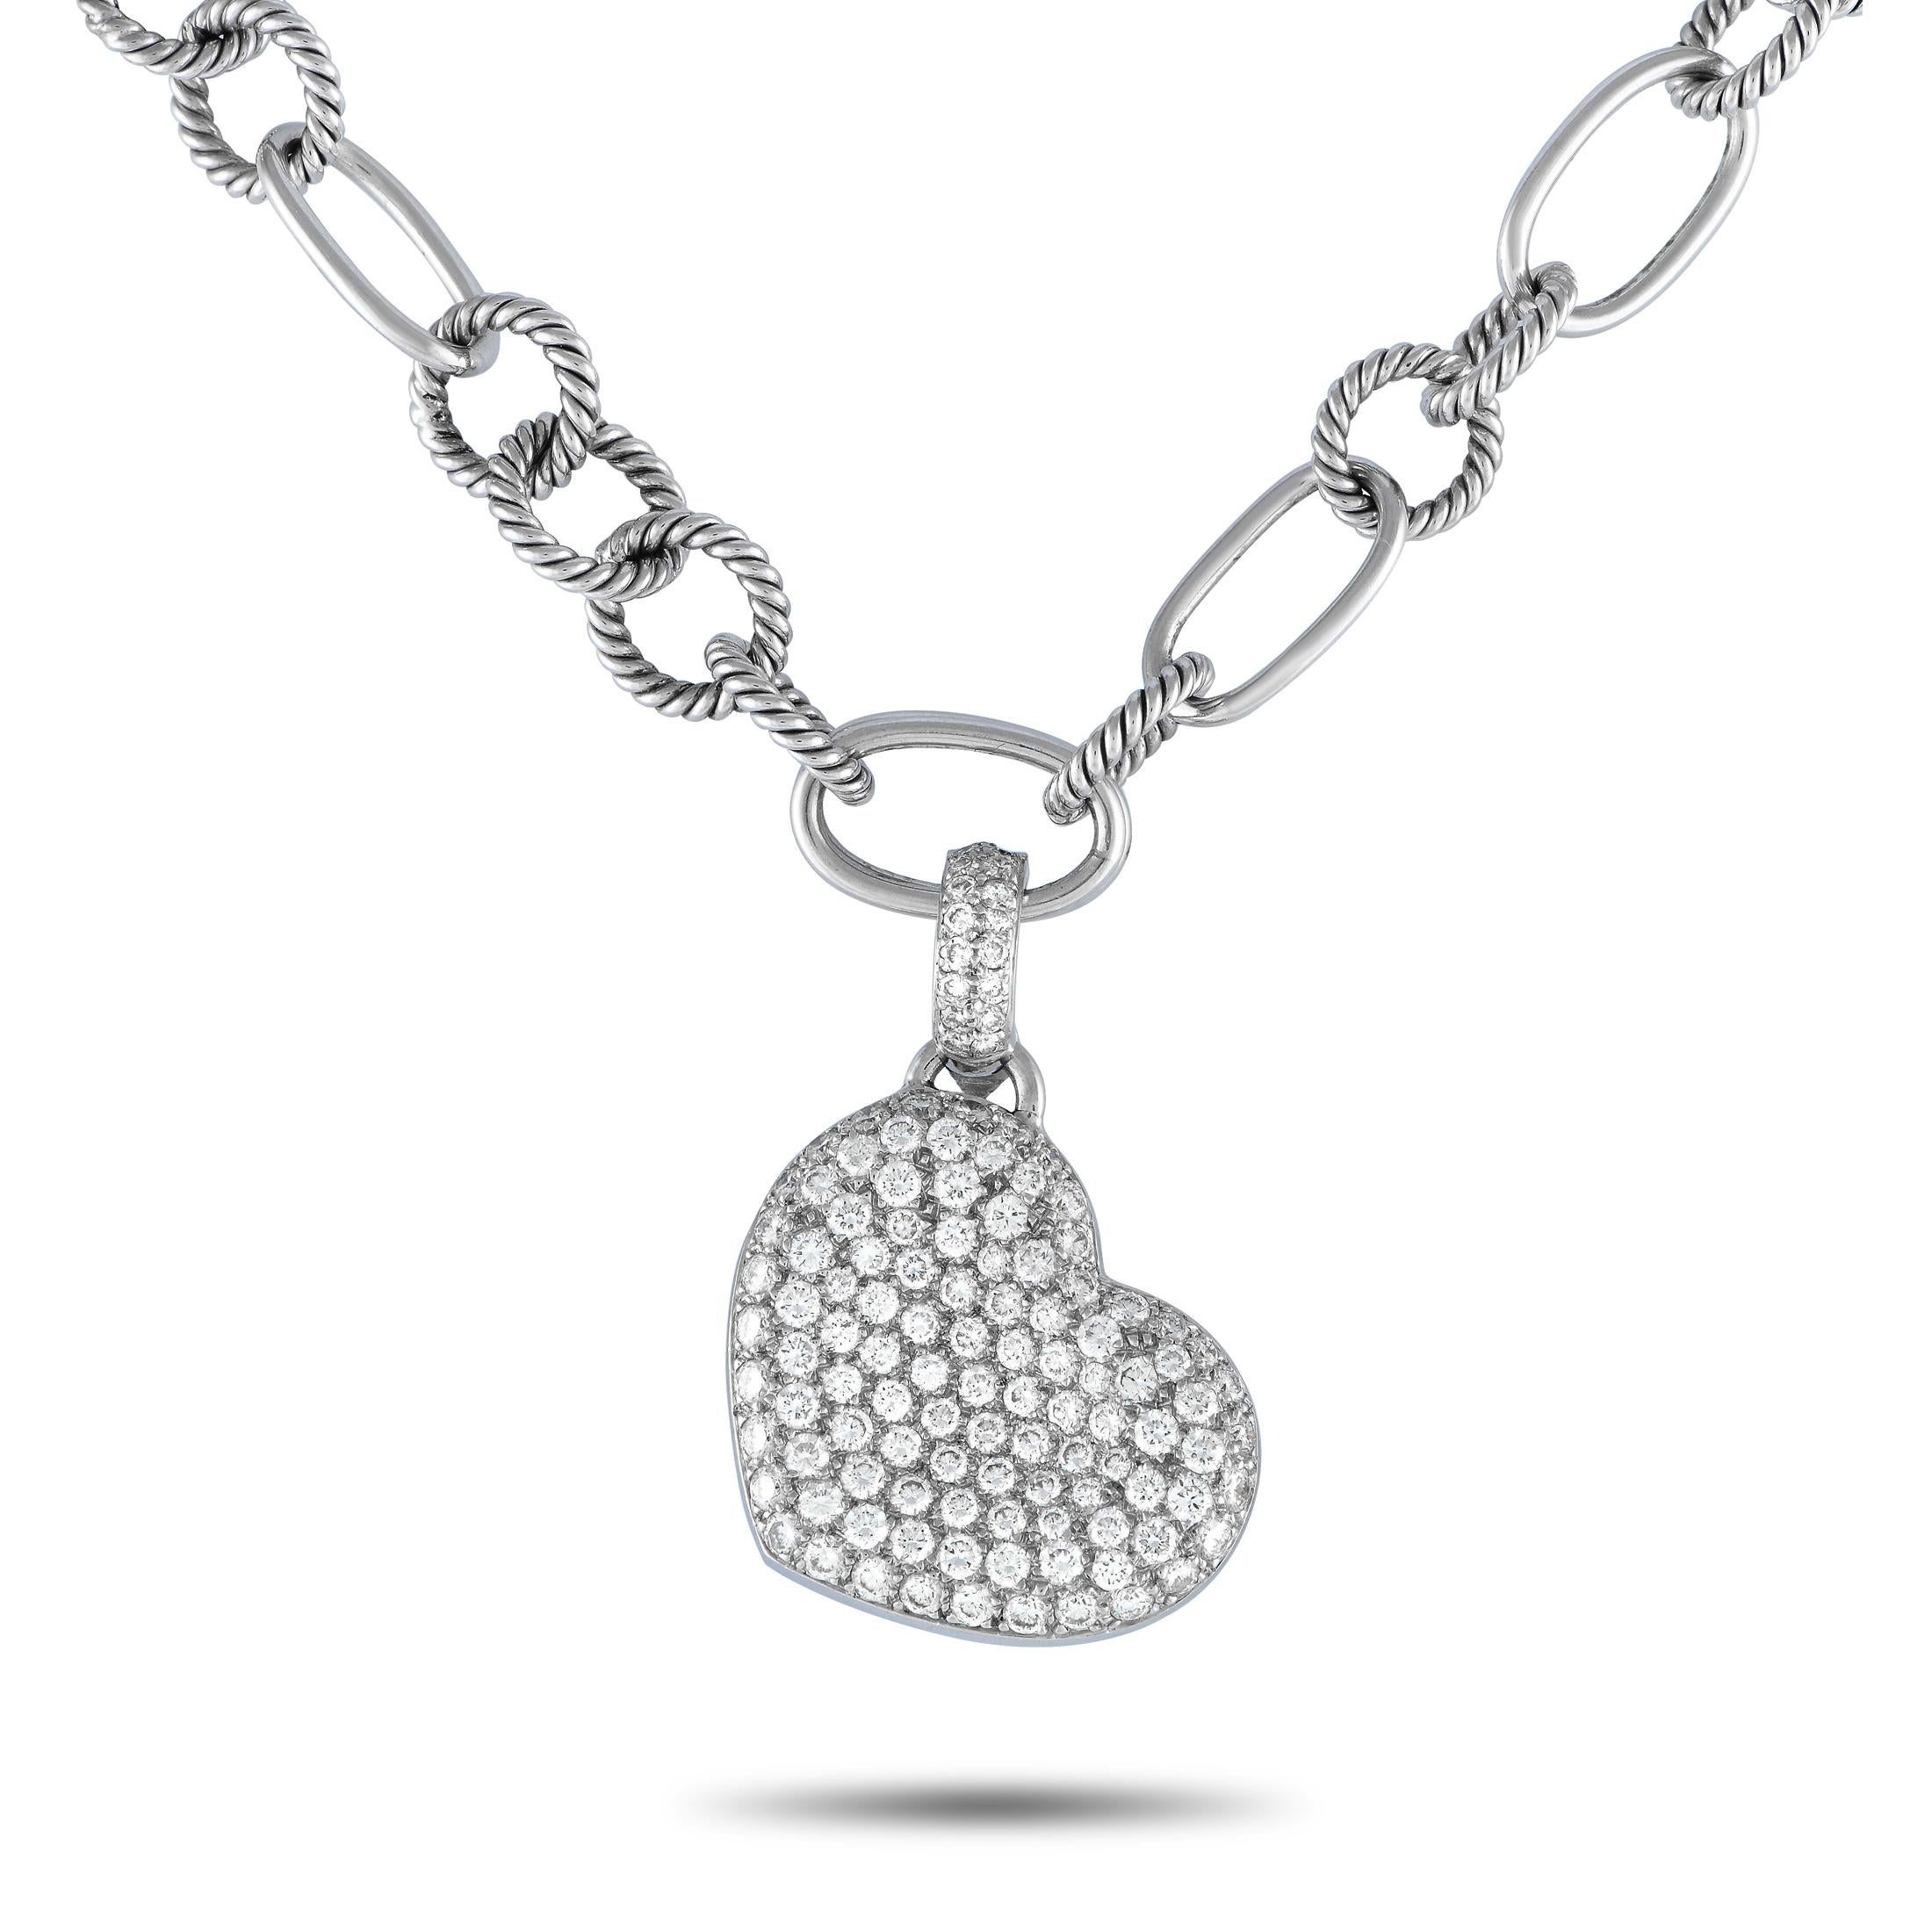 LB Exclusive 18k White Gold 5.0 Carat Diamond Heart Pendant Necklace In Excellent Condition For Sale In Southampton, PA